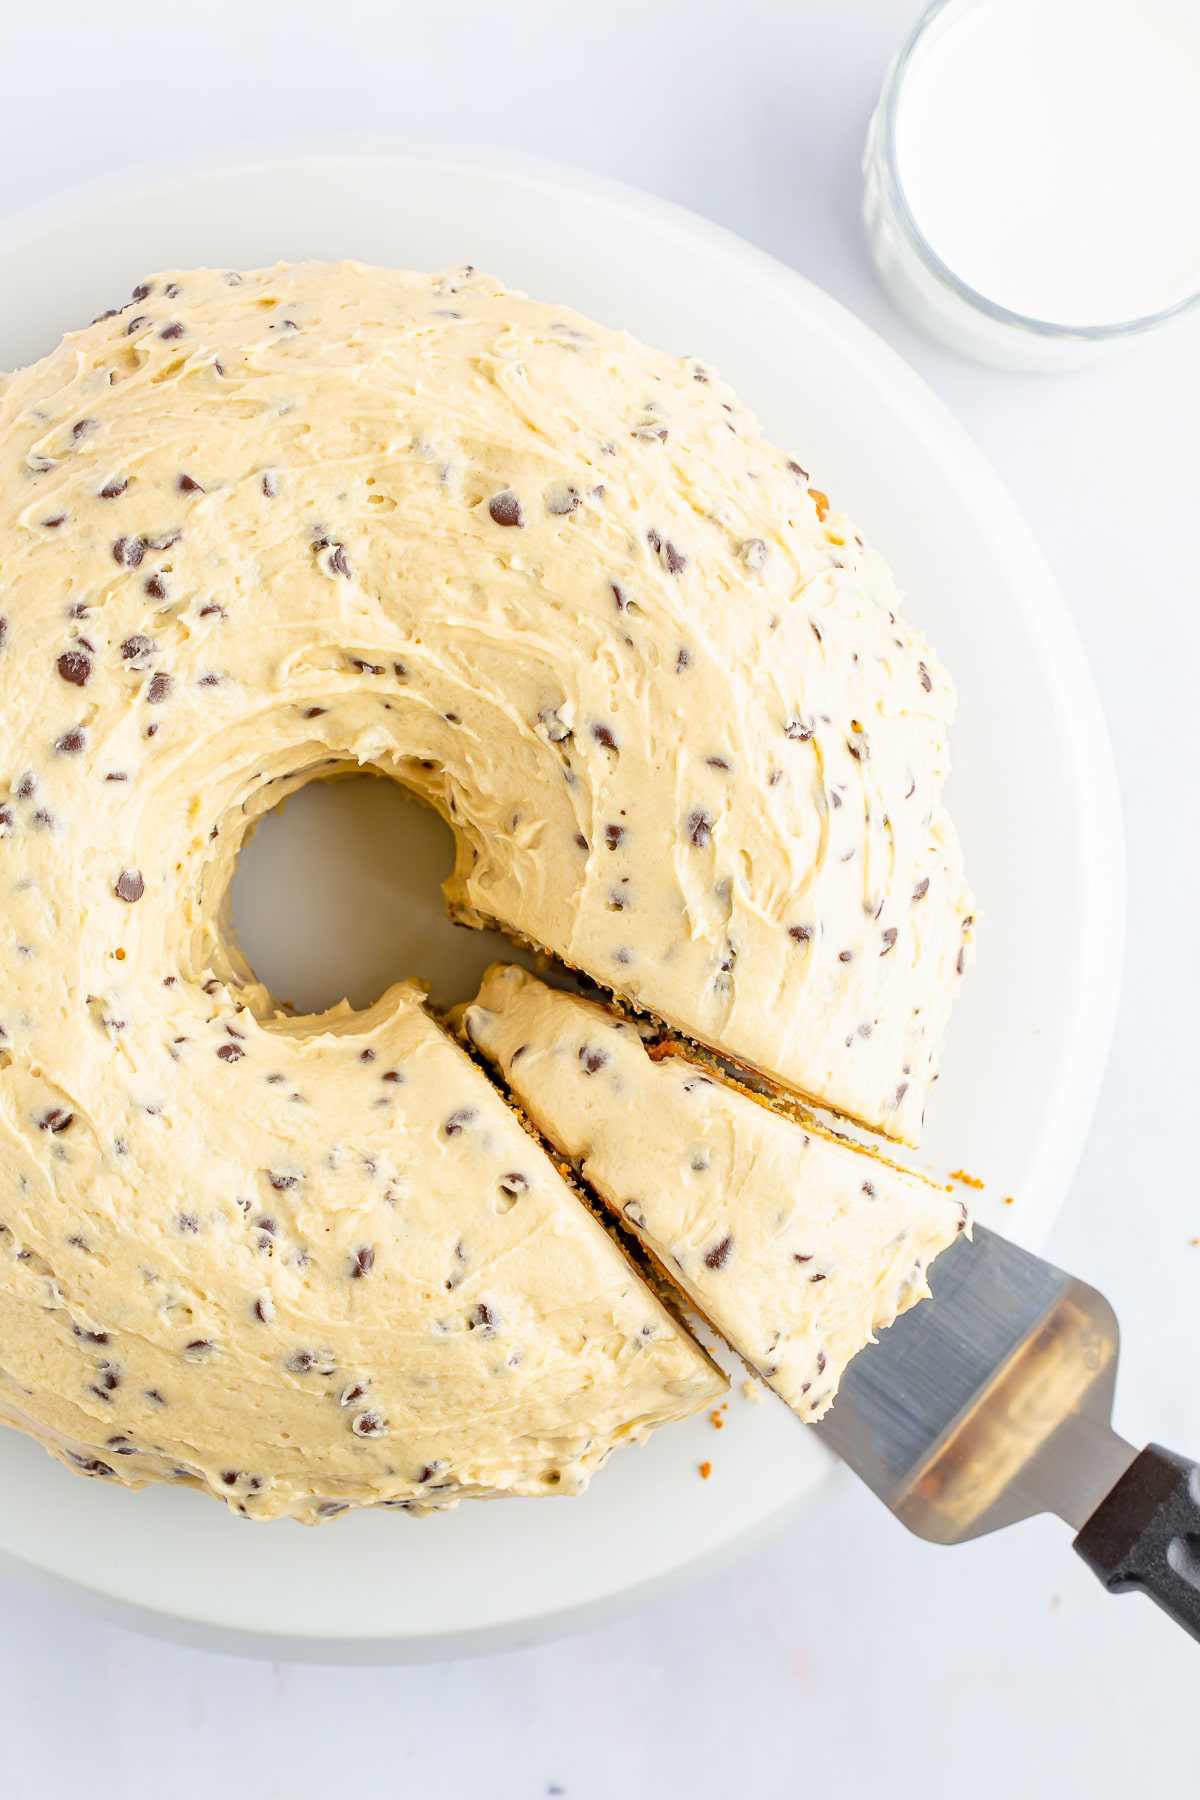 Overhead image of chocolate chip bundt cake with cake server taking a slice out, on white cake stand